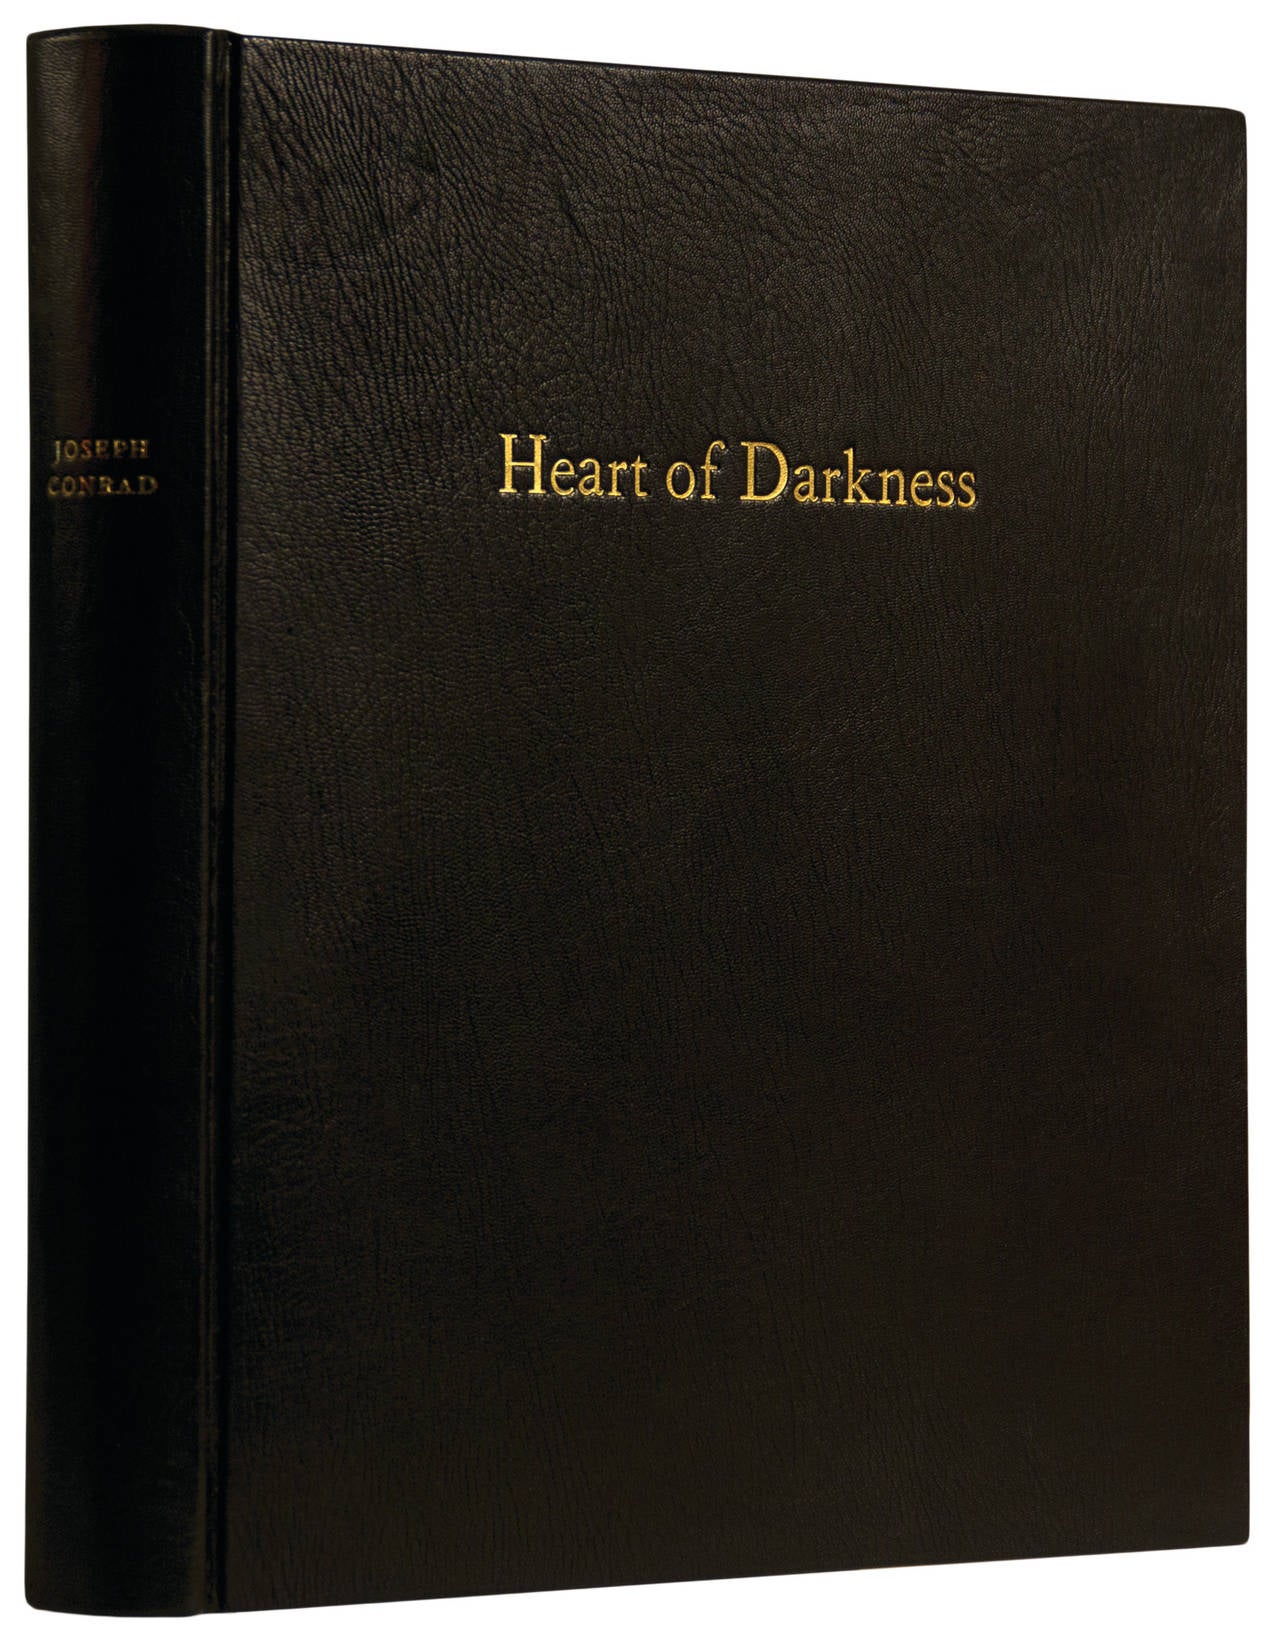 Heart of Darkness by Joseph Conrad, Illustrated by Sean Scully. [6], 121, [3] pp.  Illustrated with eight full-page etchings by Sean Scully.  4to., bound in original full black niger morocco, preserved in a suede-lined black cloth box.  New York: